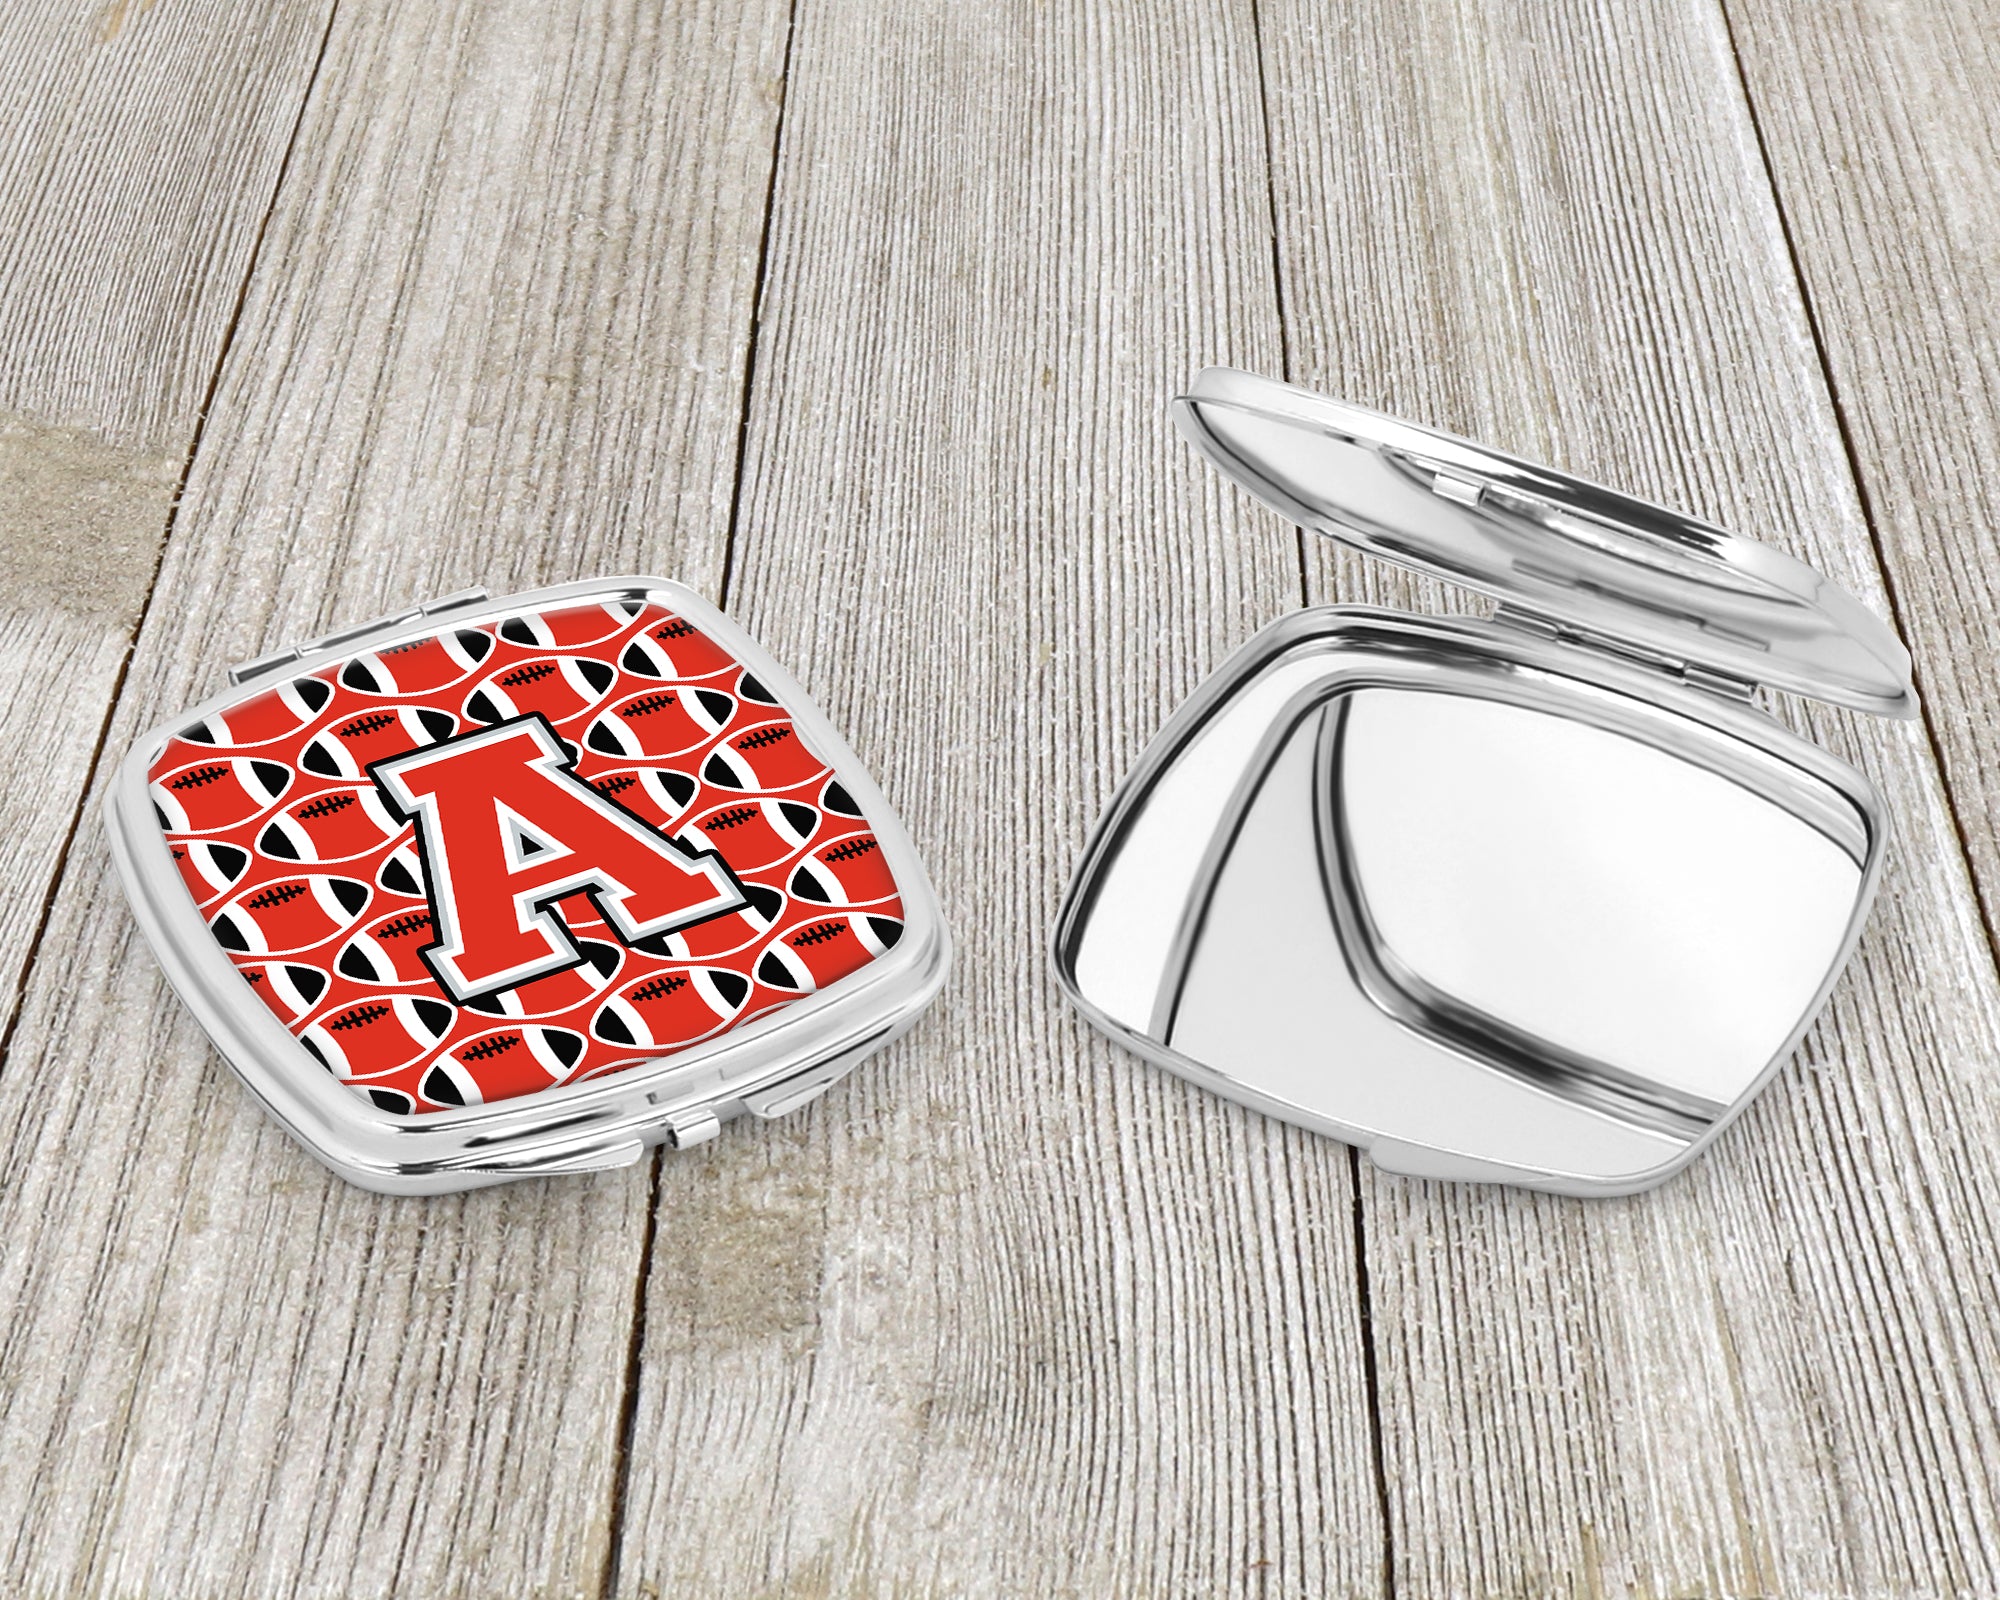 Letter A Football Scarlet and Grey Compact Mirror CJ1067-ASCM